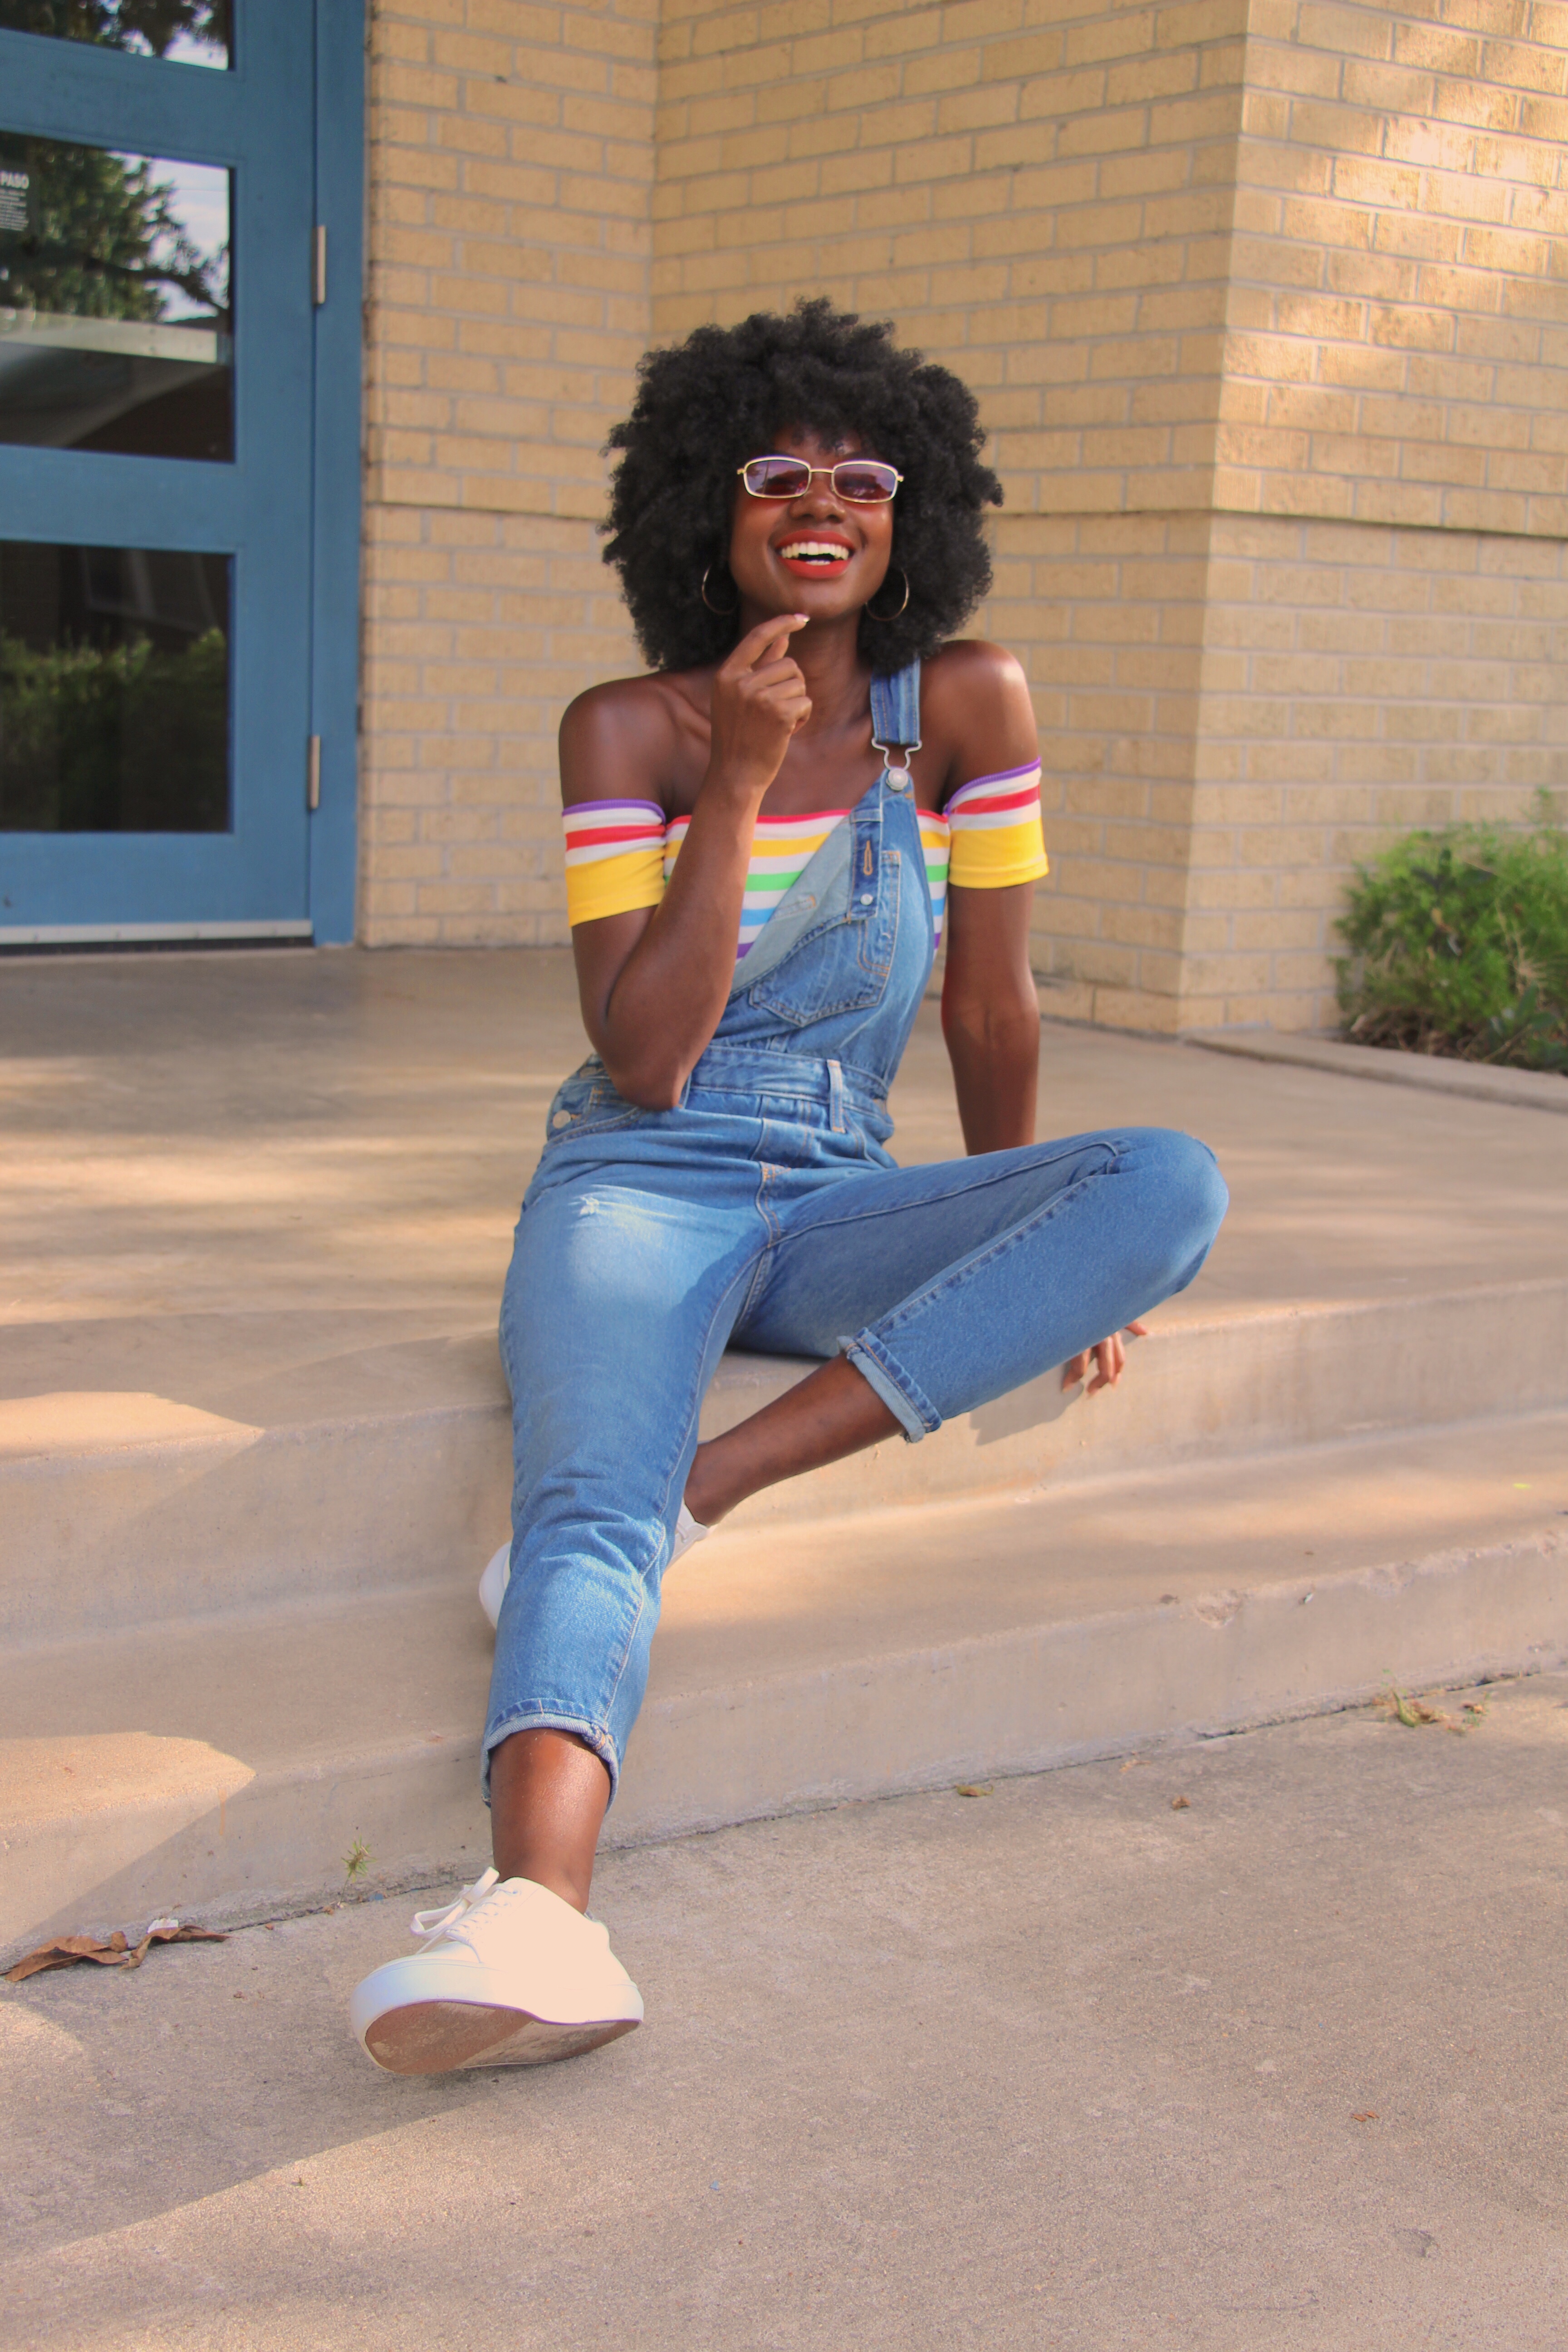 ebay fashion, natural hair, natural hair afro, top fashion blogger, 90s fashion, 90s fashion inspo, 90s fashion ideas, colored sunglasses, how to style overalls, black fashion blogger